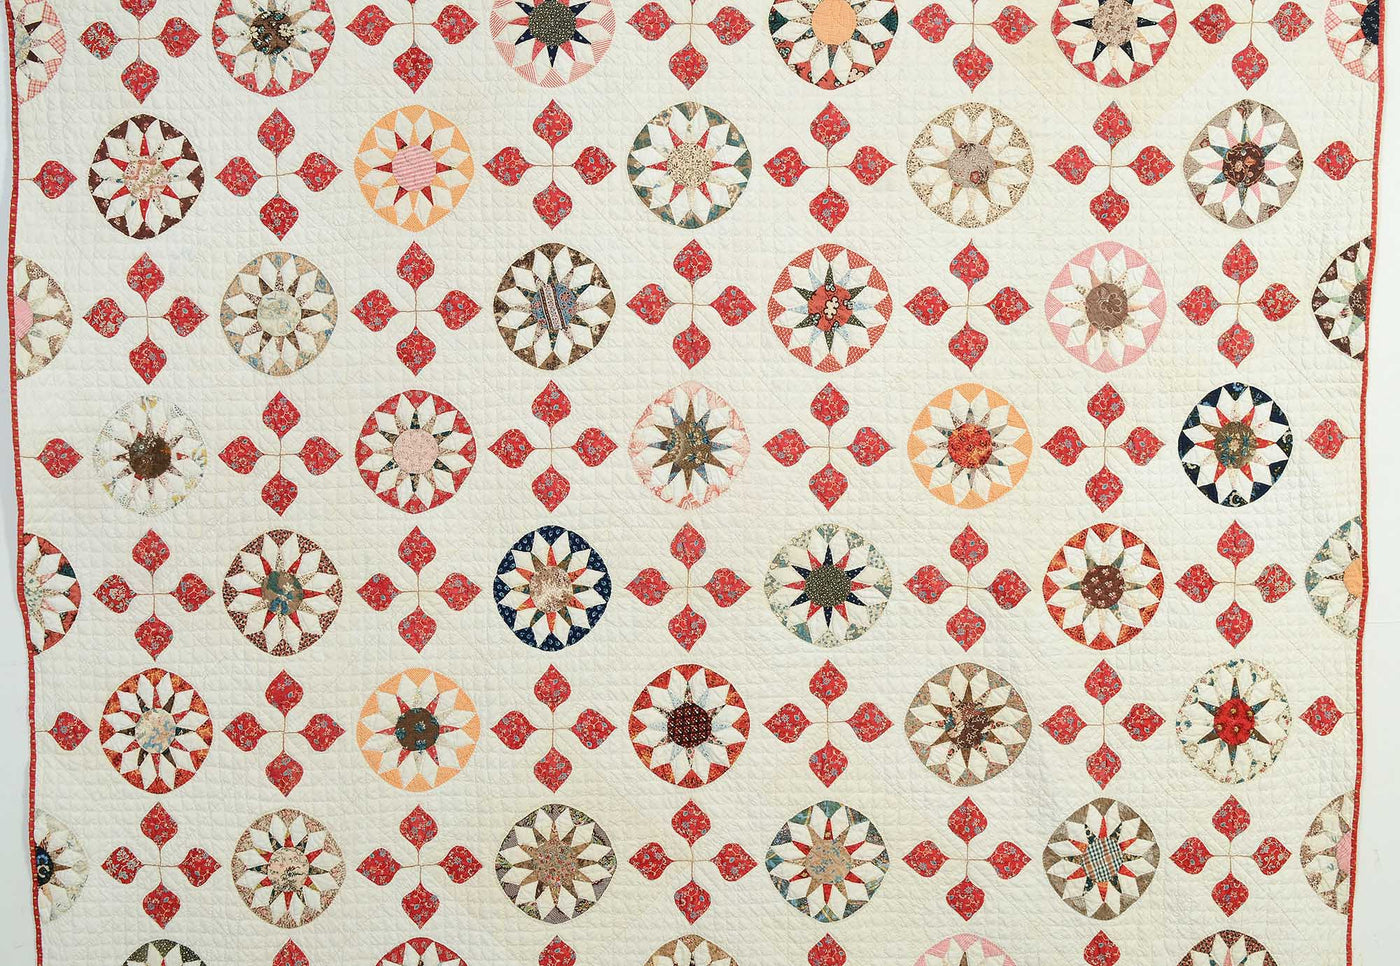 rising-sun-and-hearts-quilt-1453402-detail-1